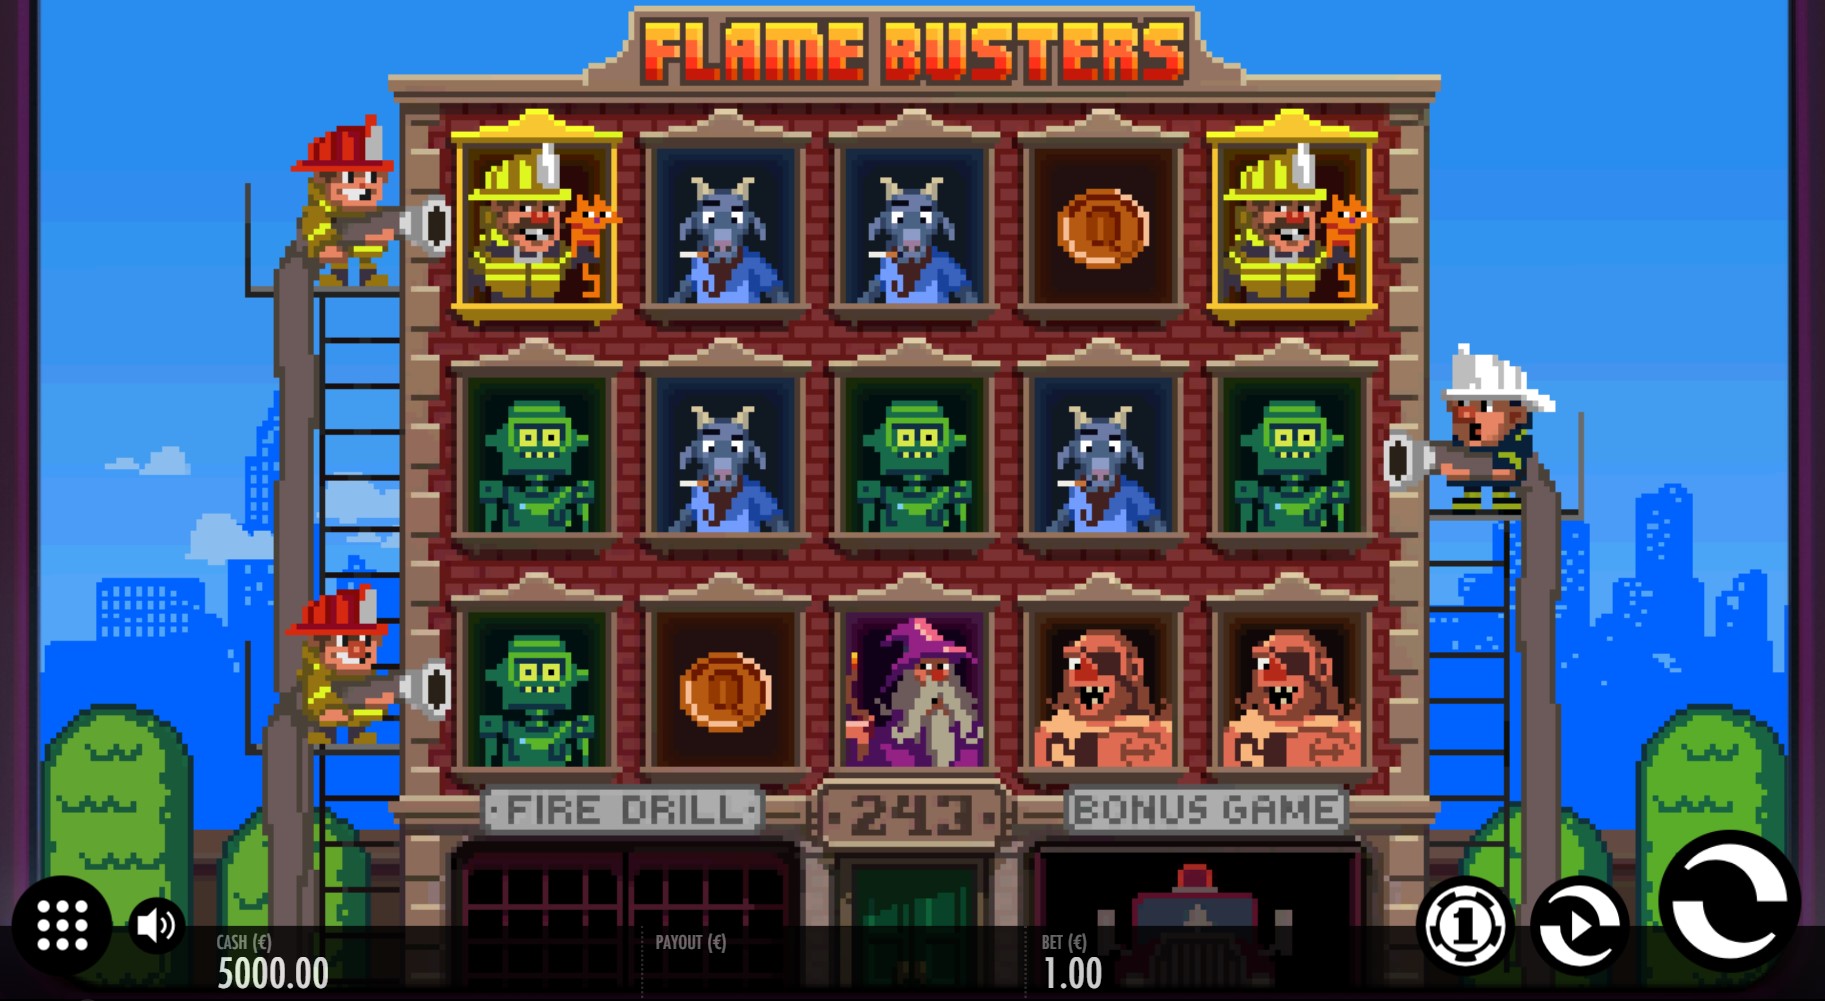 Flame Busters slot